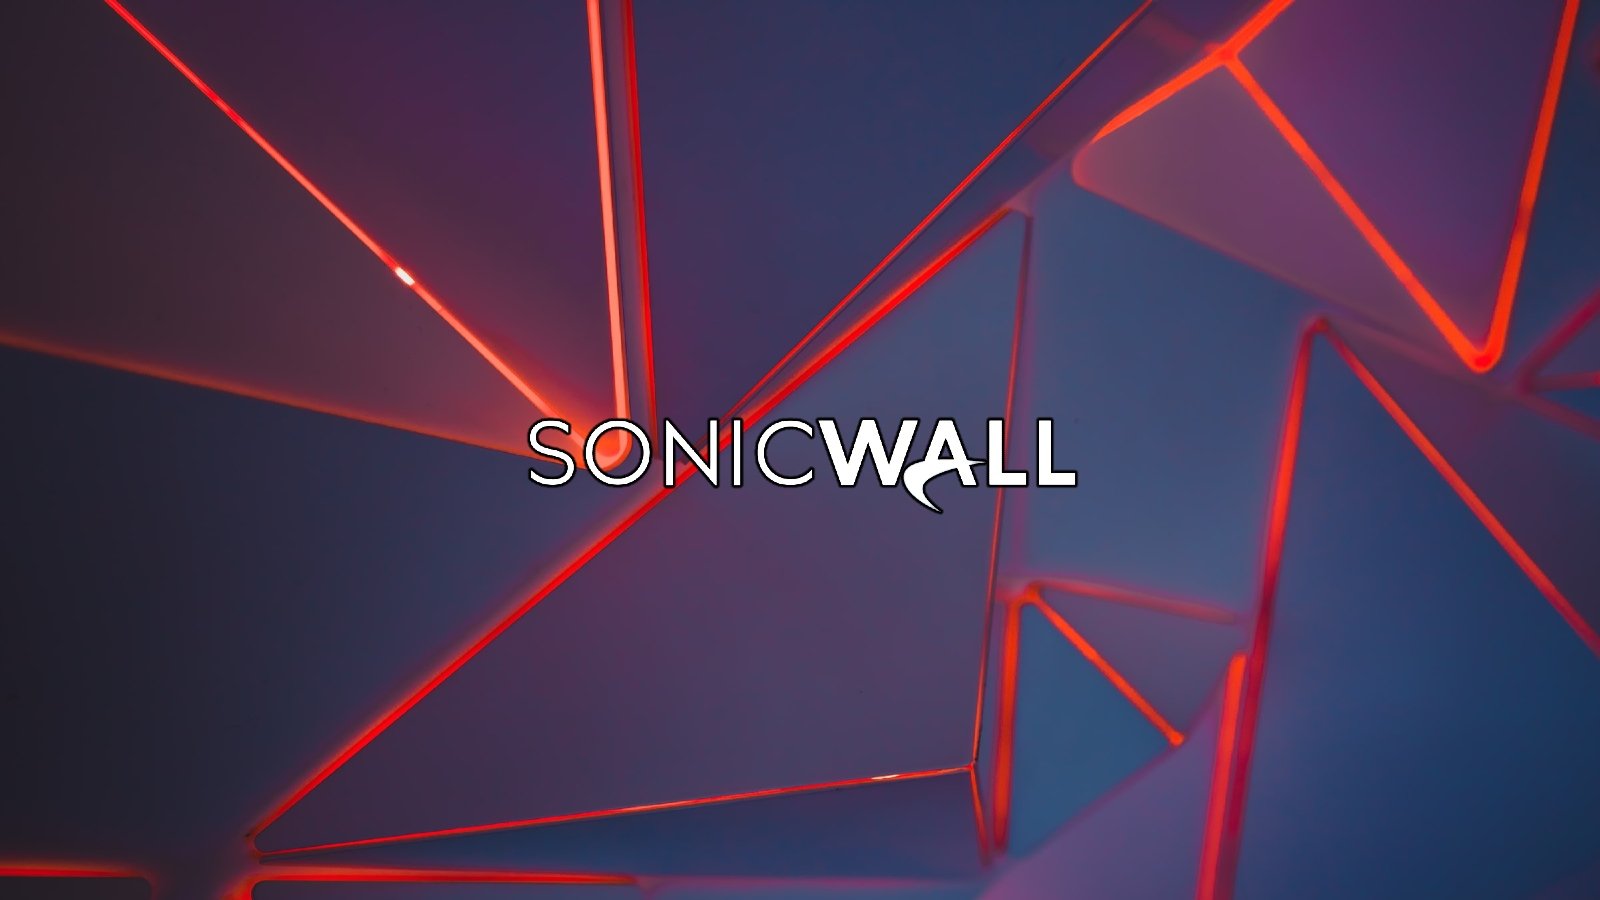 New ransomware group uses SonicWall zero-day to breach networks